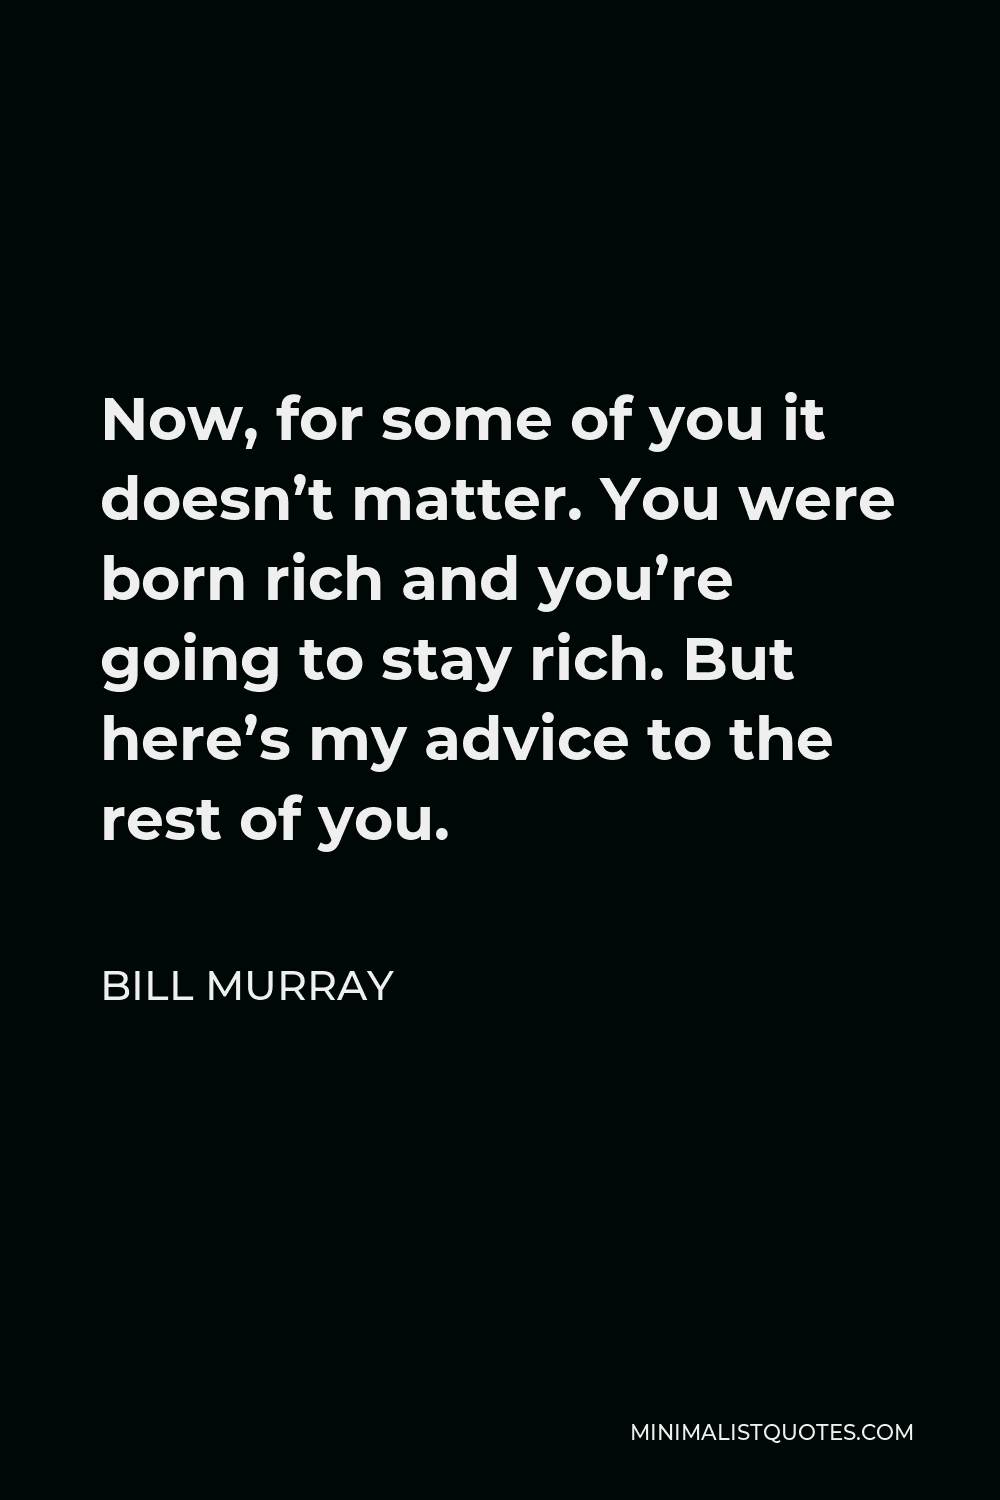 Bill Murray Quote - Now, for some of you it doesn’t matter. You were born rich and you’re going to stay rich. But here’s my advice to the rest of you.